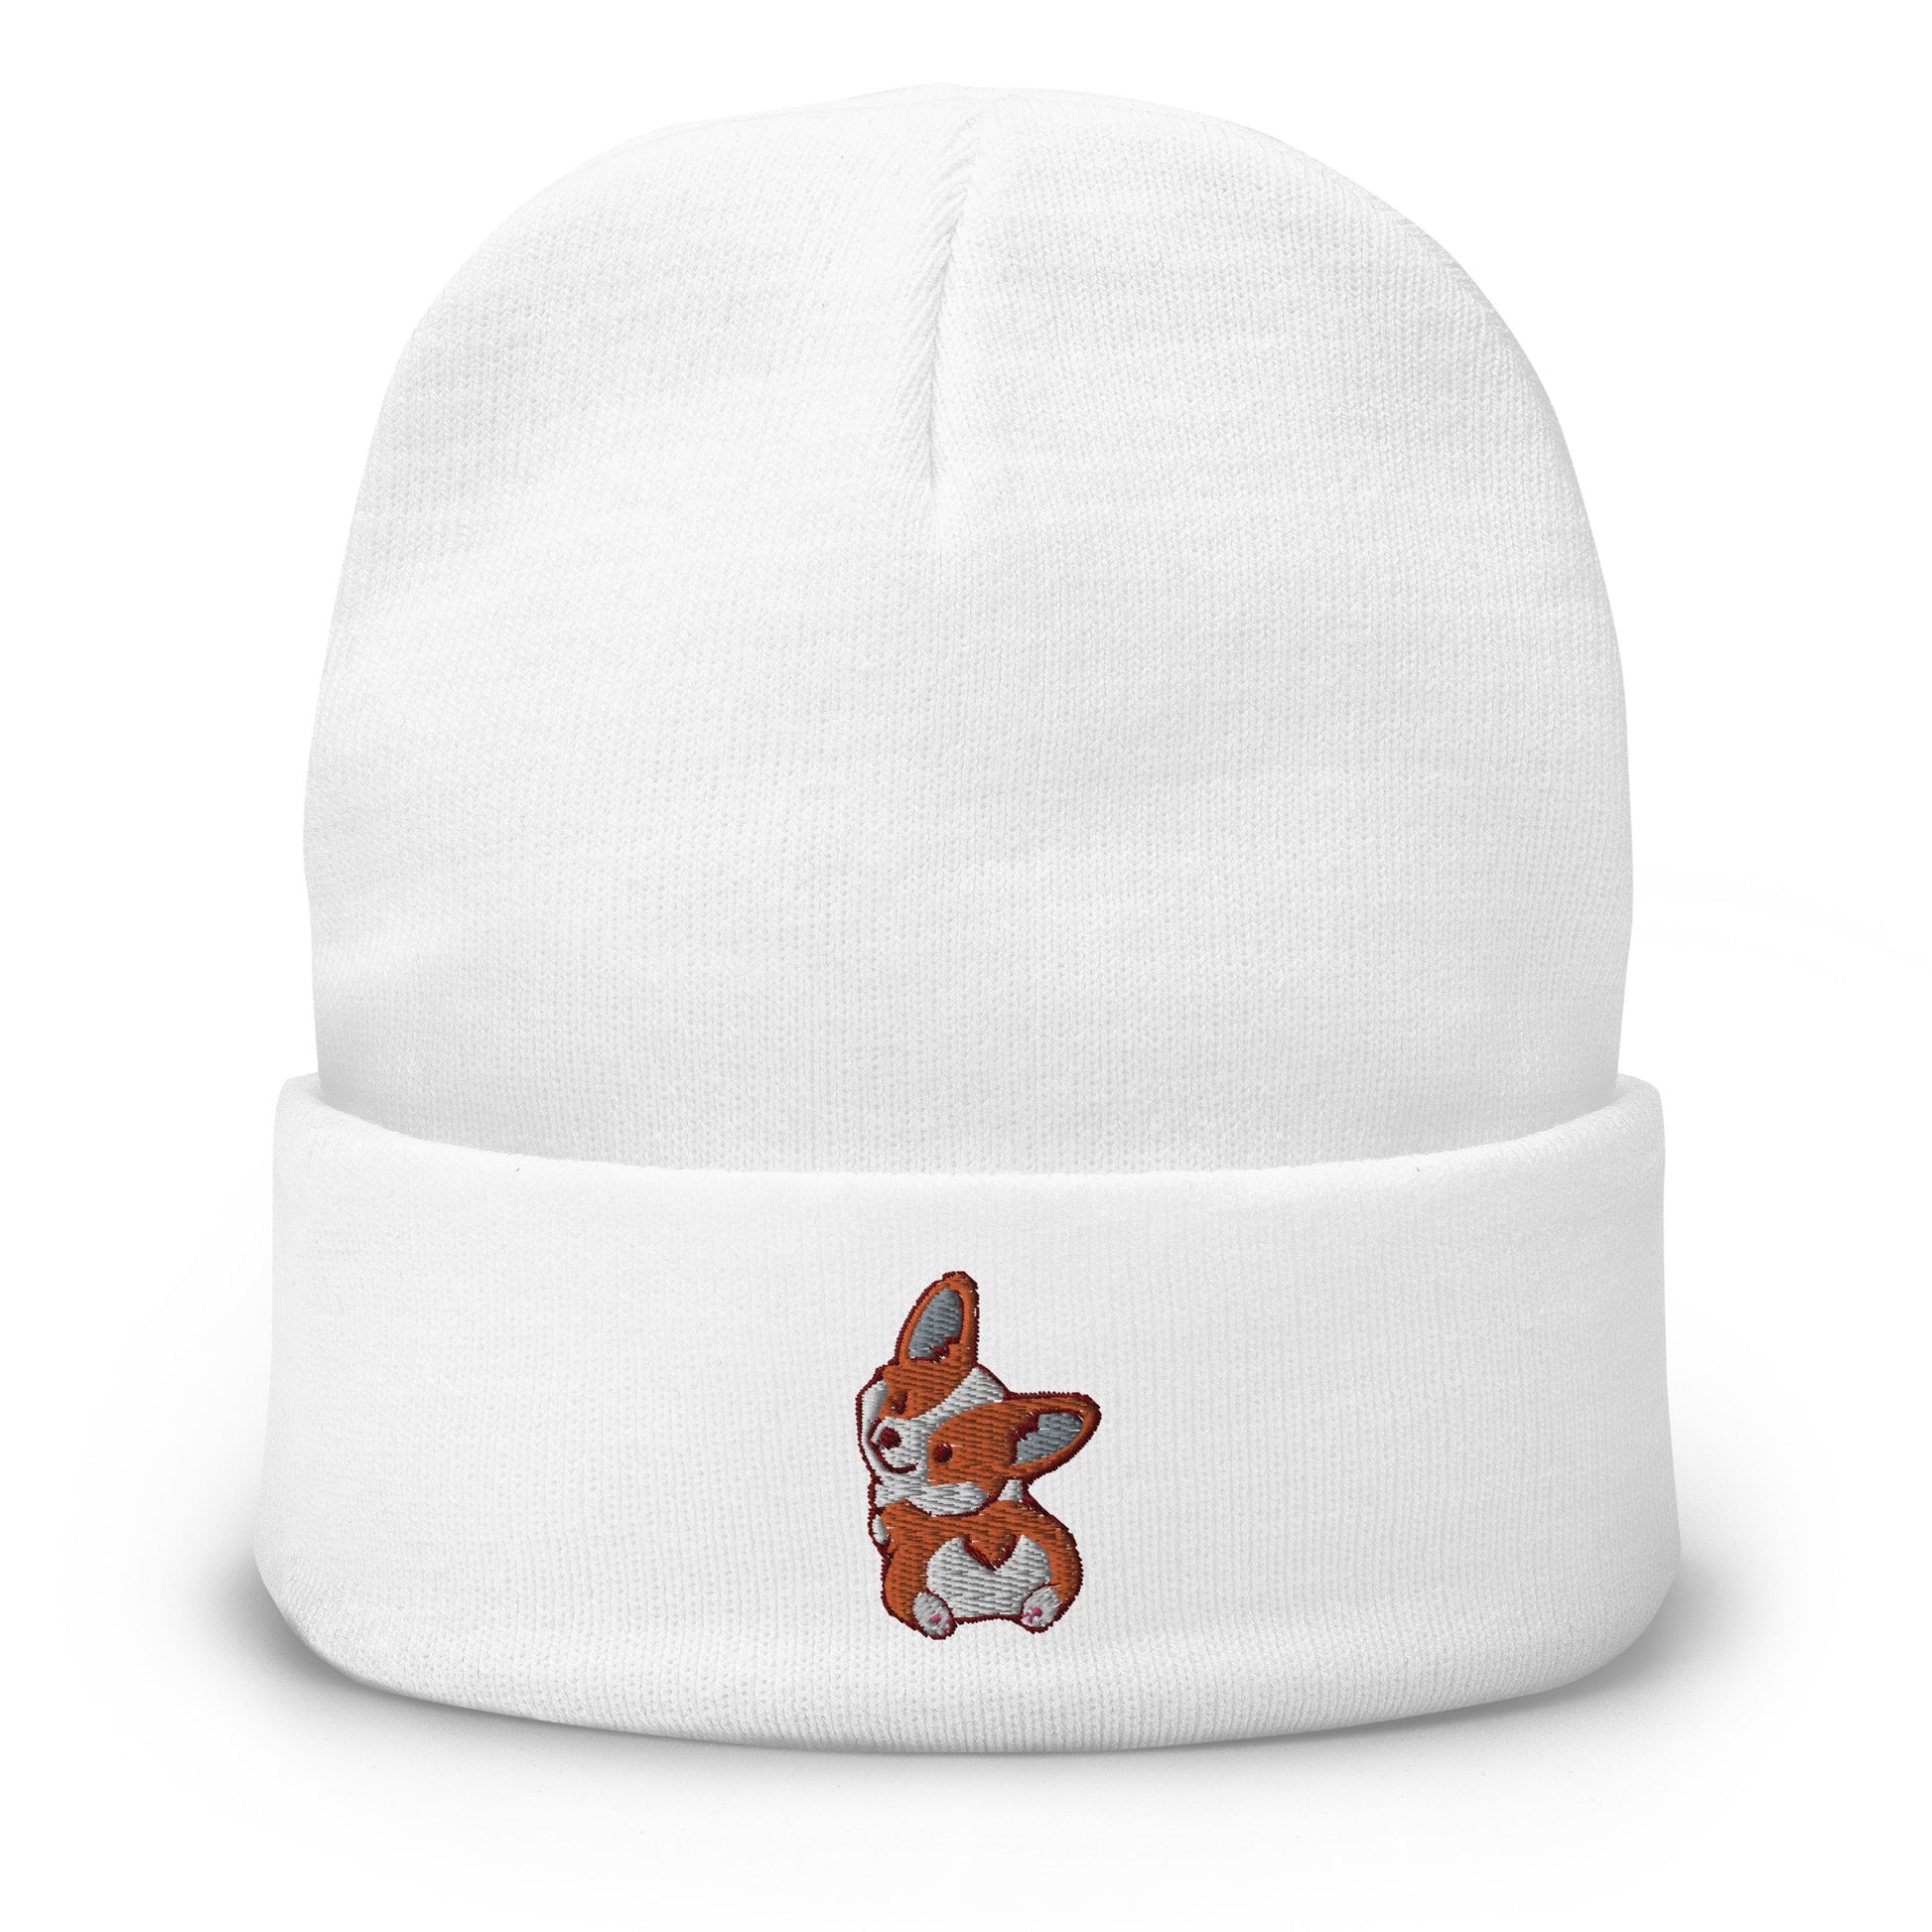 Corgi Butt Embroidered  Beanie, Puppy Dog Embroidery Cotton Party Men Women Stretchy Winter Adult Aesthetic Cap Hat Starcove Fashion